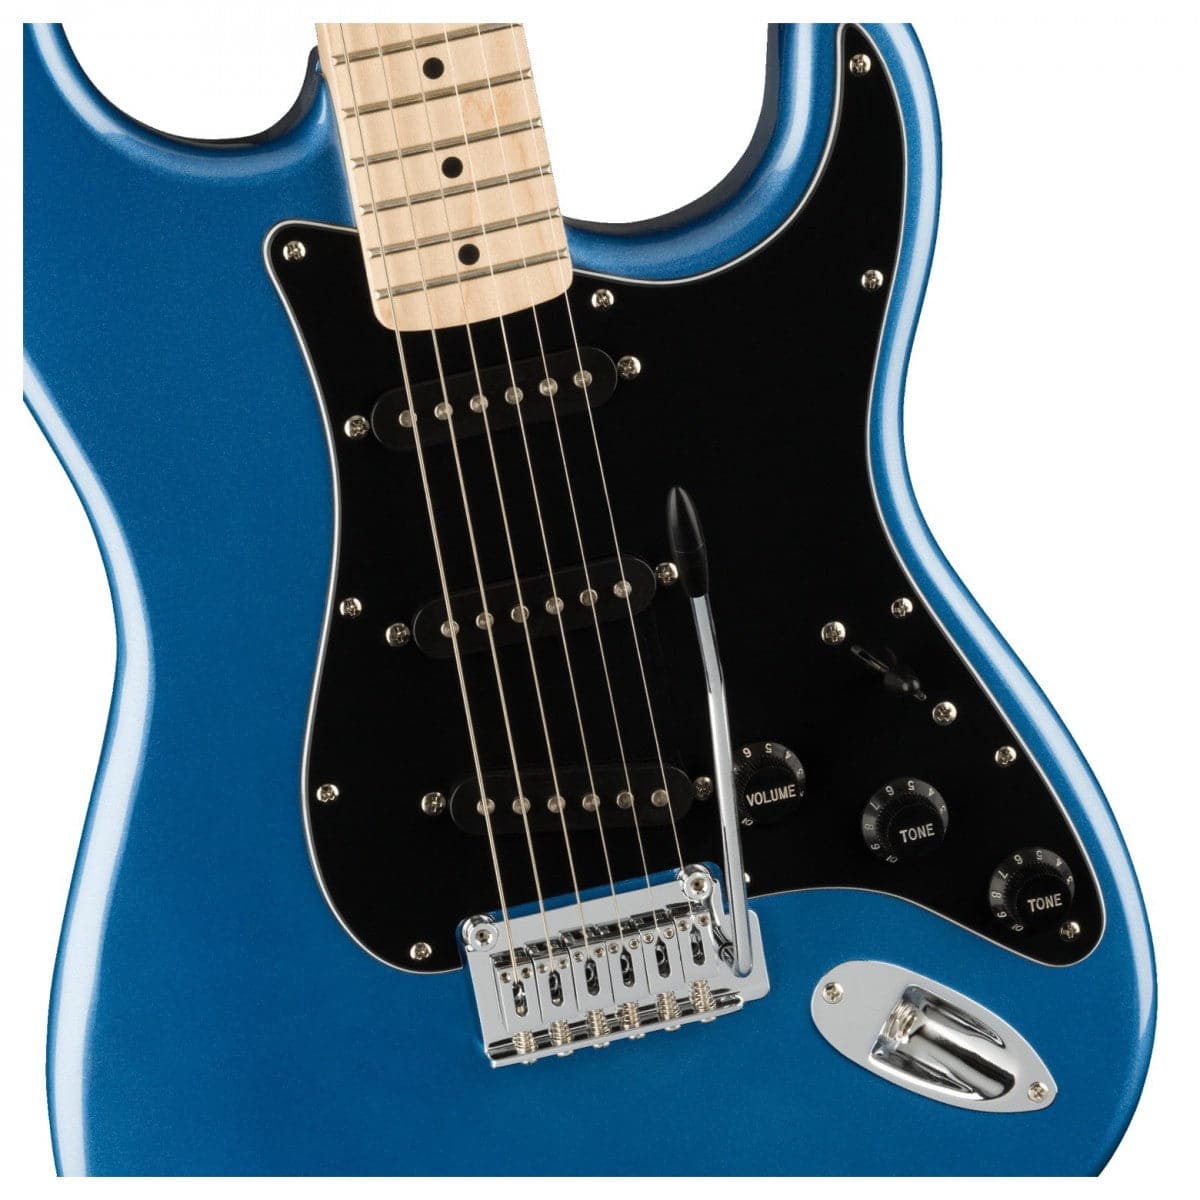 Squier Affinity Series Stratocaster - Lake Placid Blue Rich text editor